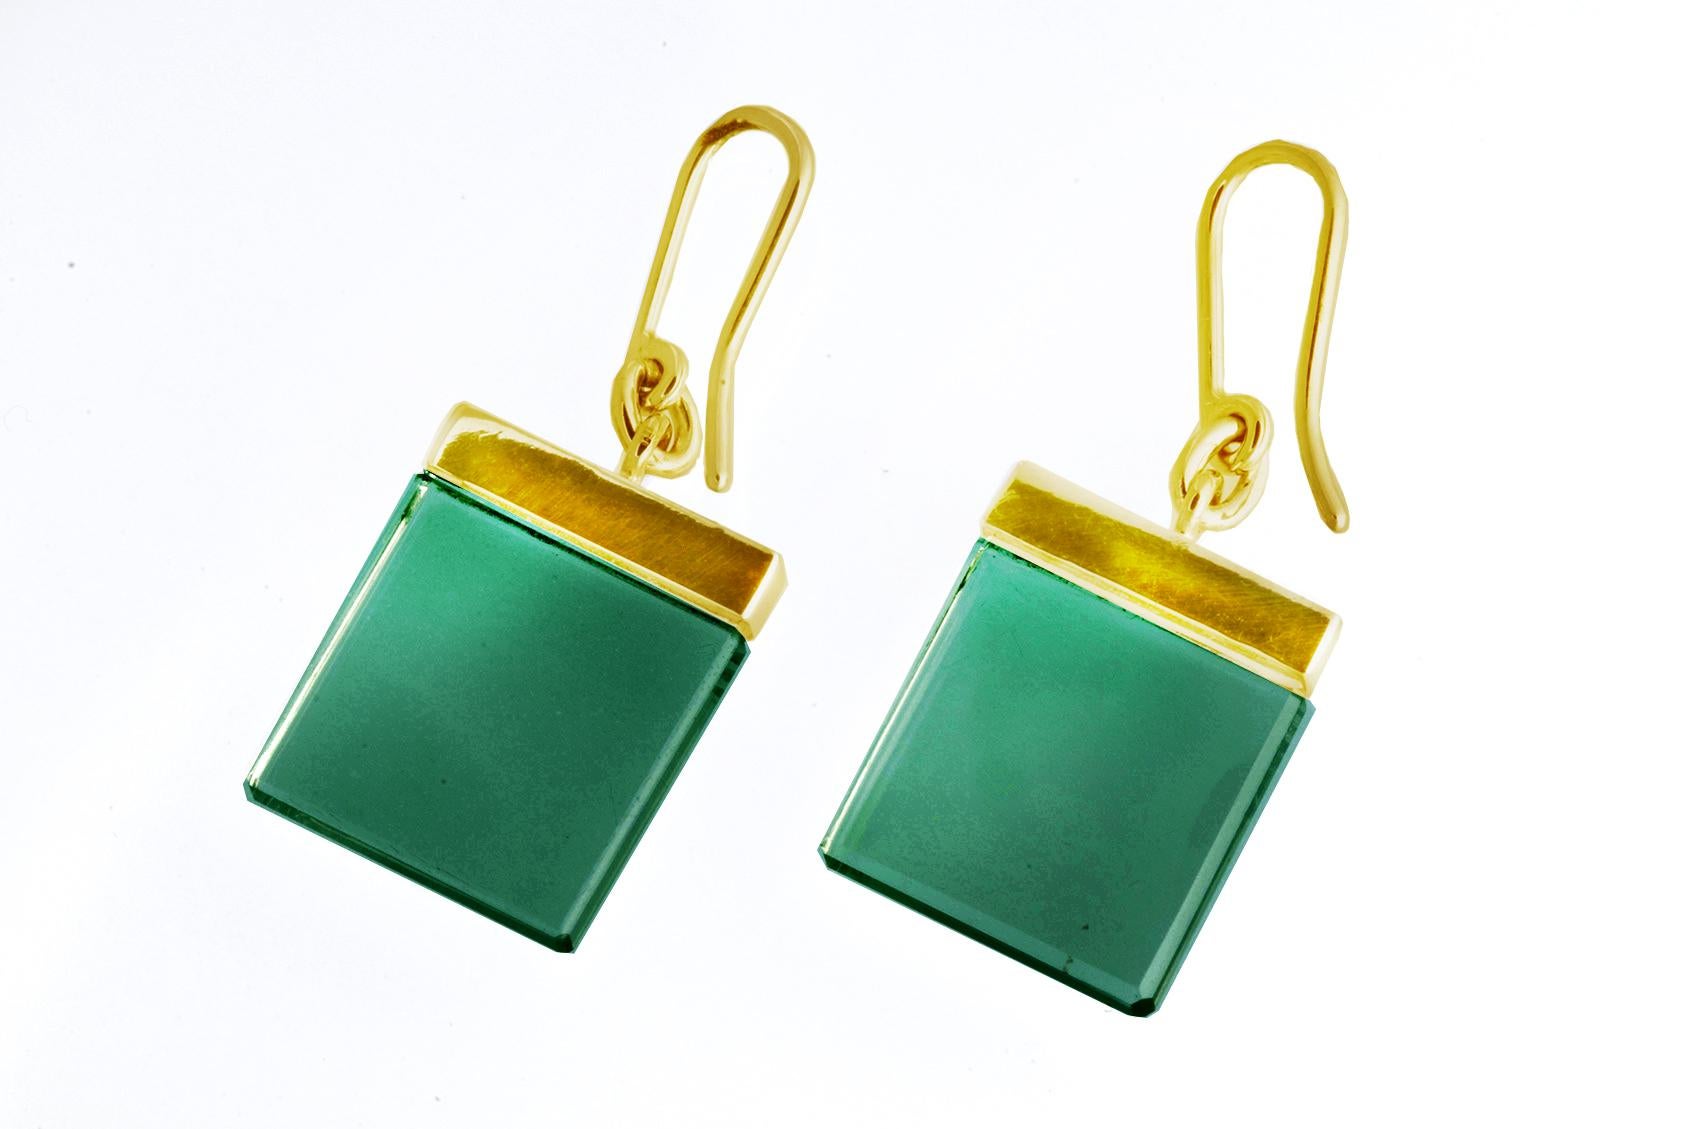 The Ink collection has been featured in both Harper's Bazaar UA and Vogue UA publications. These artisan earrings are crafted from 18 karat yellow gold and feature deep green lab-grown quartzes measuring 15x15x3mm that are open to the light and